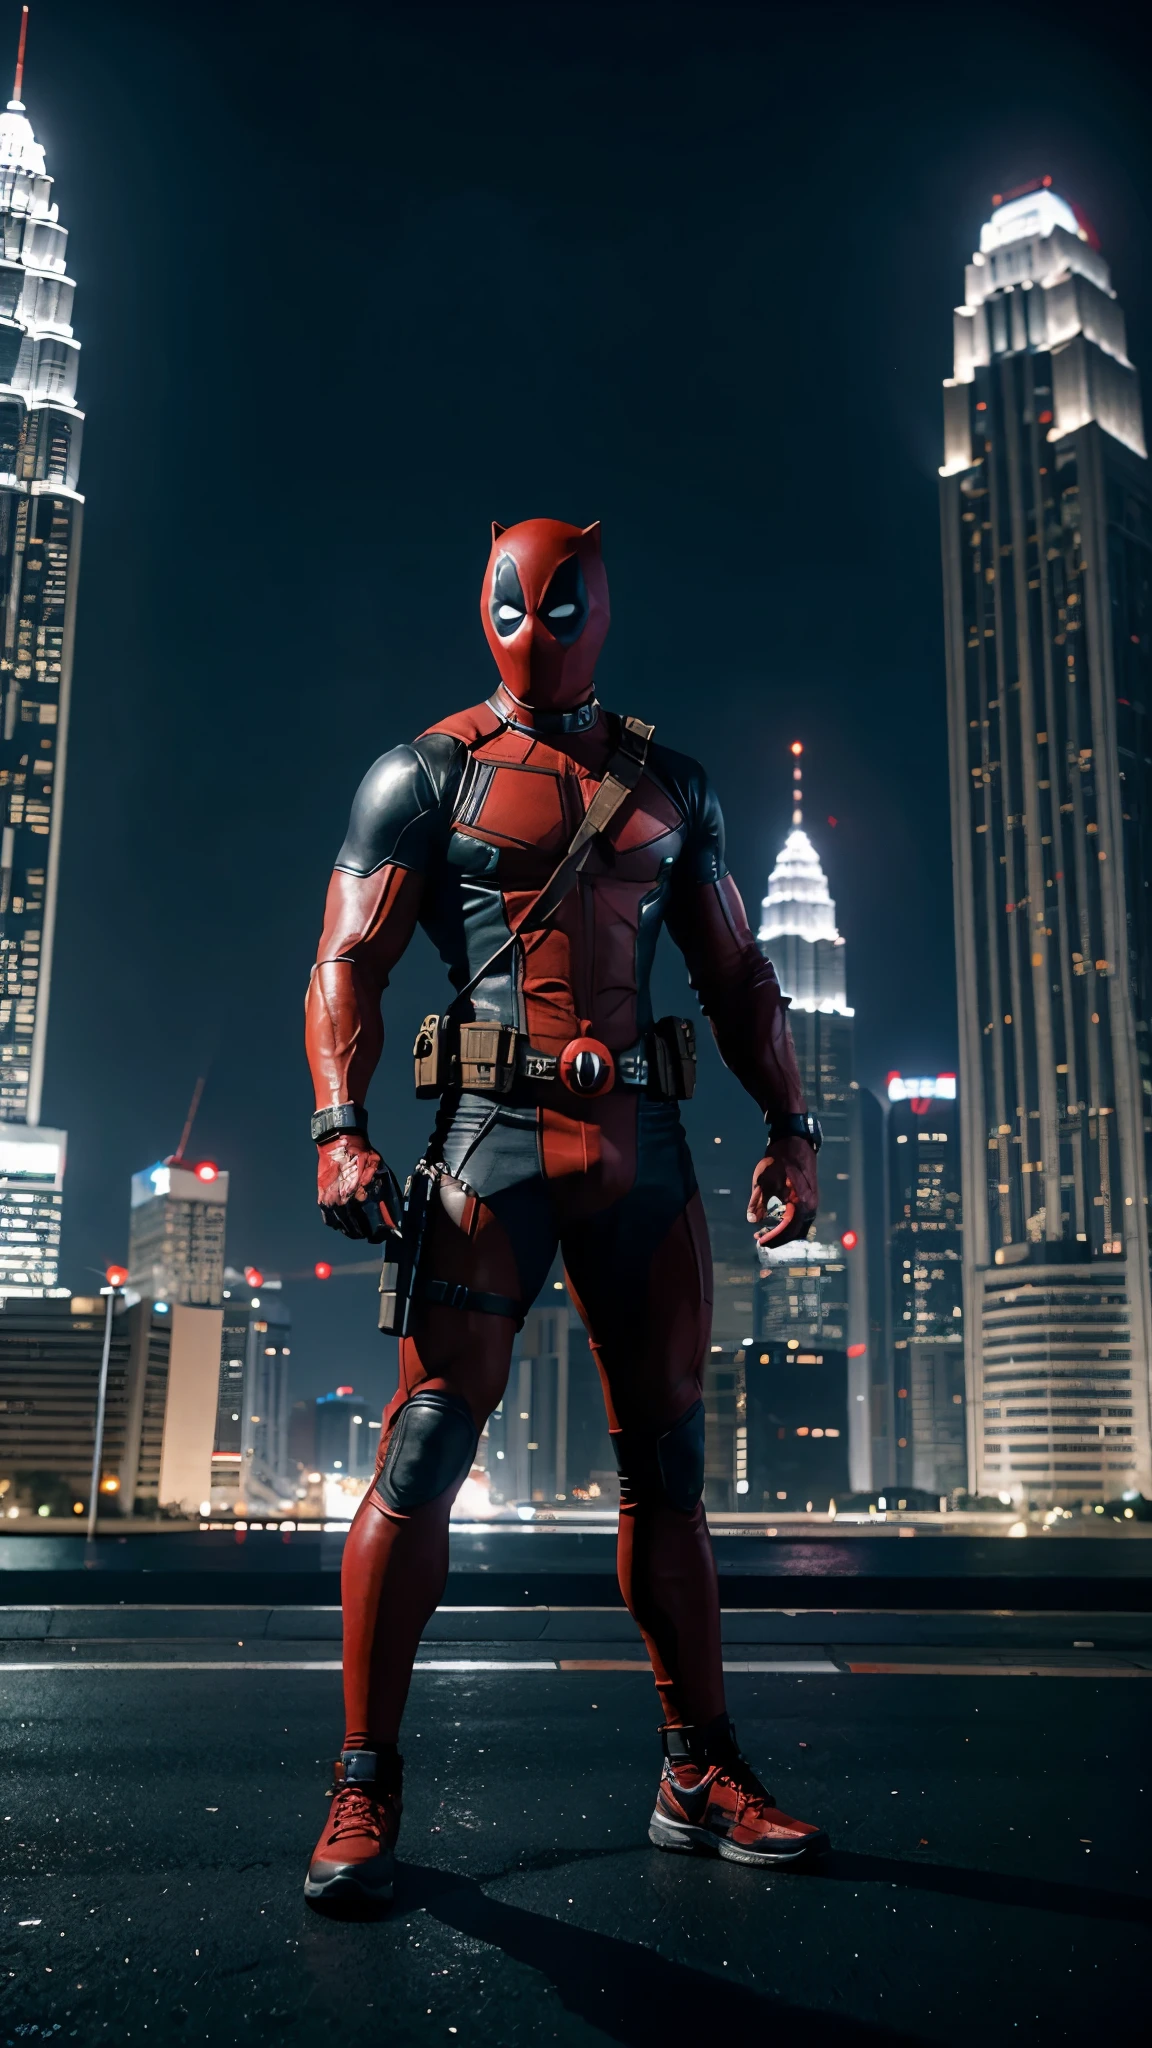 Marvel anti hero Deadpool, Muscular, nice abs and biceps, noticeable nice heavy bulge in crotch area, in Kuala Lumpur city background at night, cinematic photography, UHD, HDR